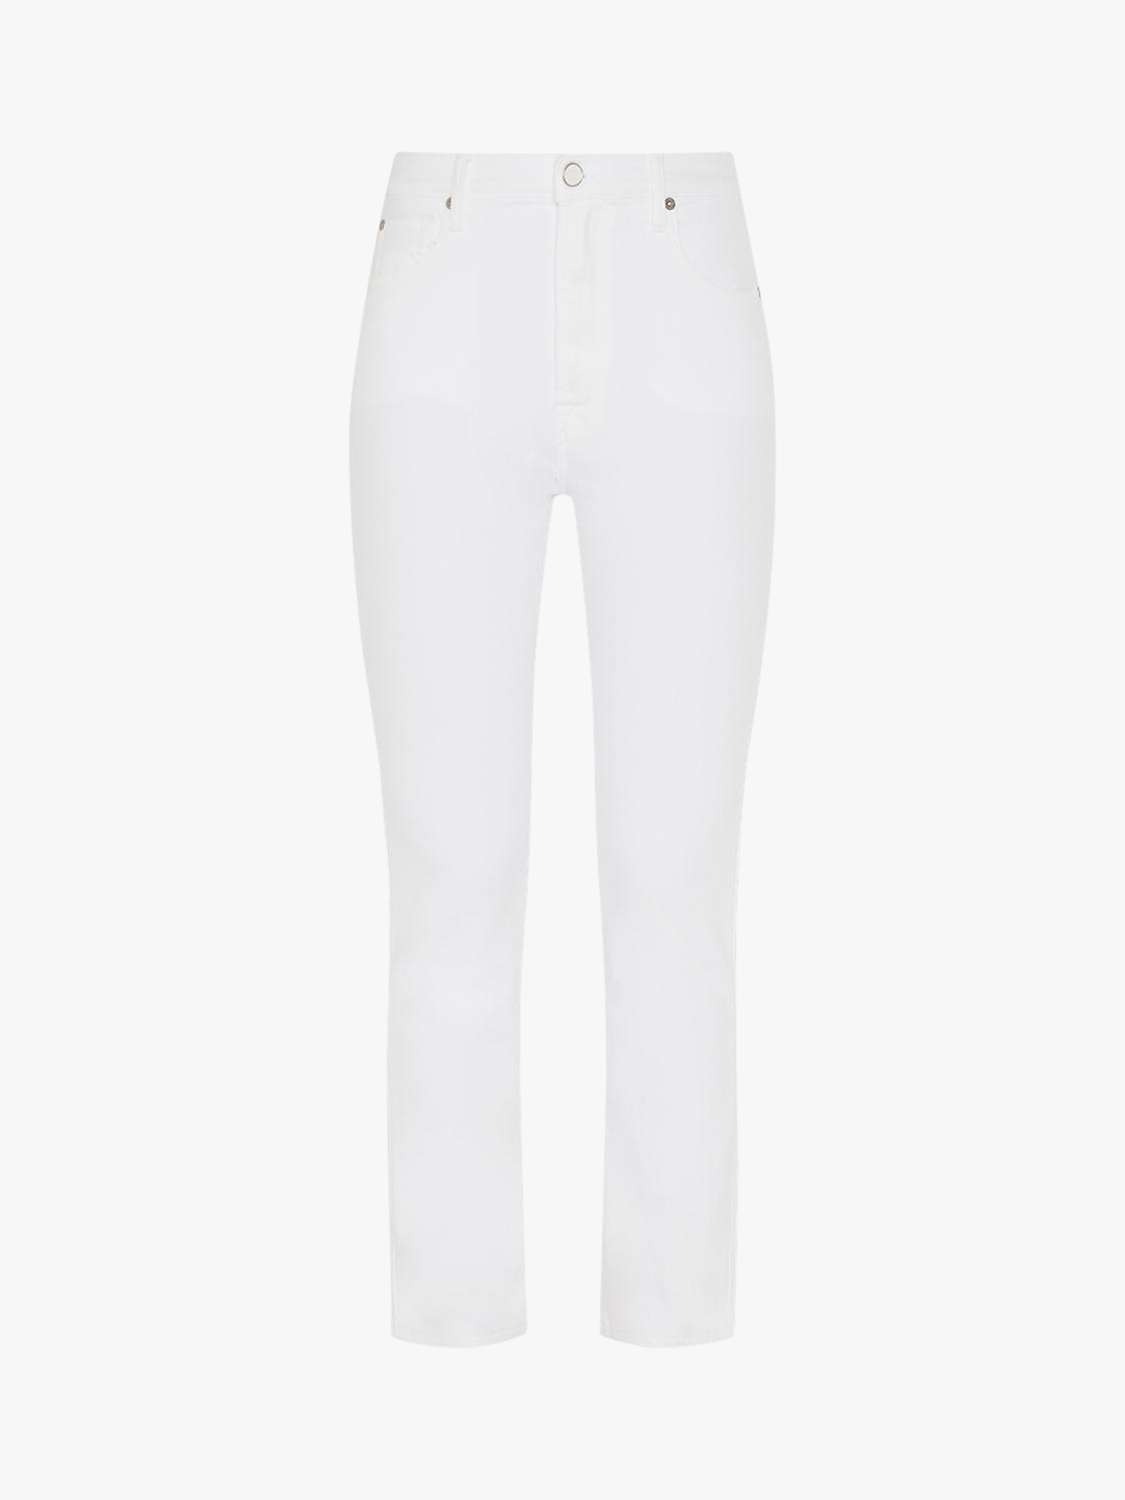 Buy 7 For All Mankind Easy Slim Jeans, White Online at johnlewis.com